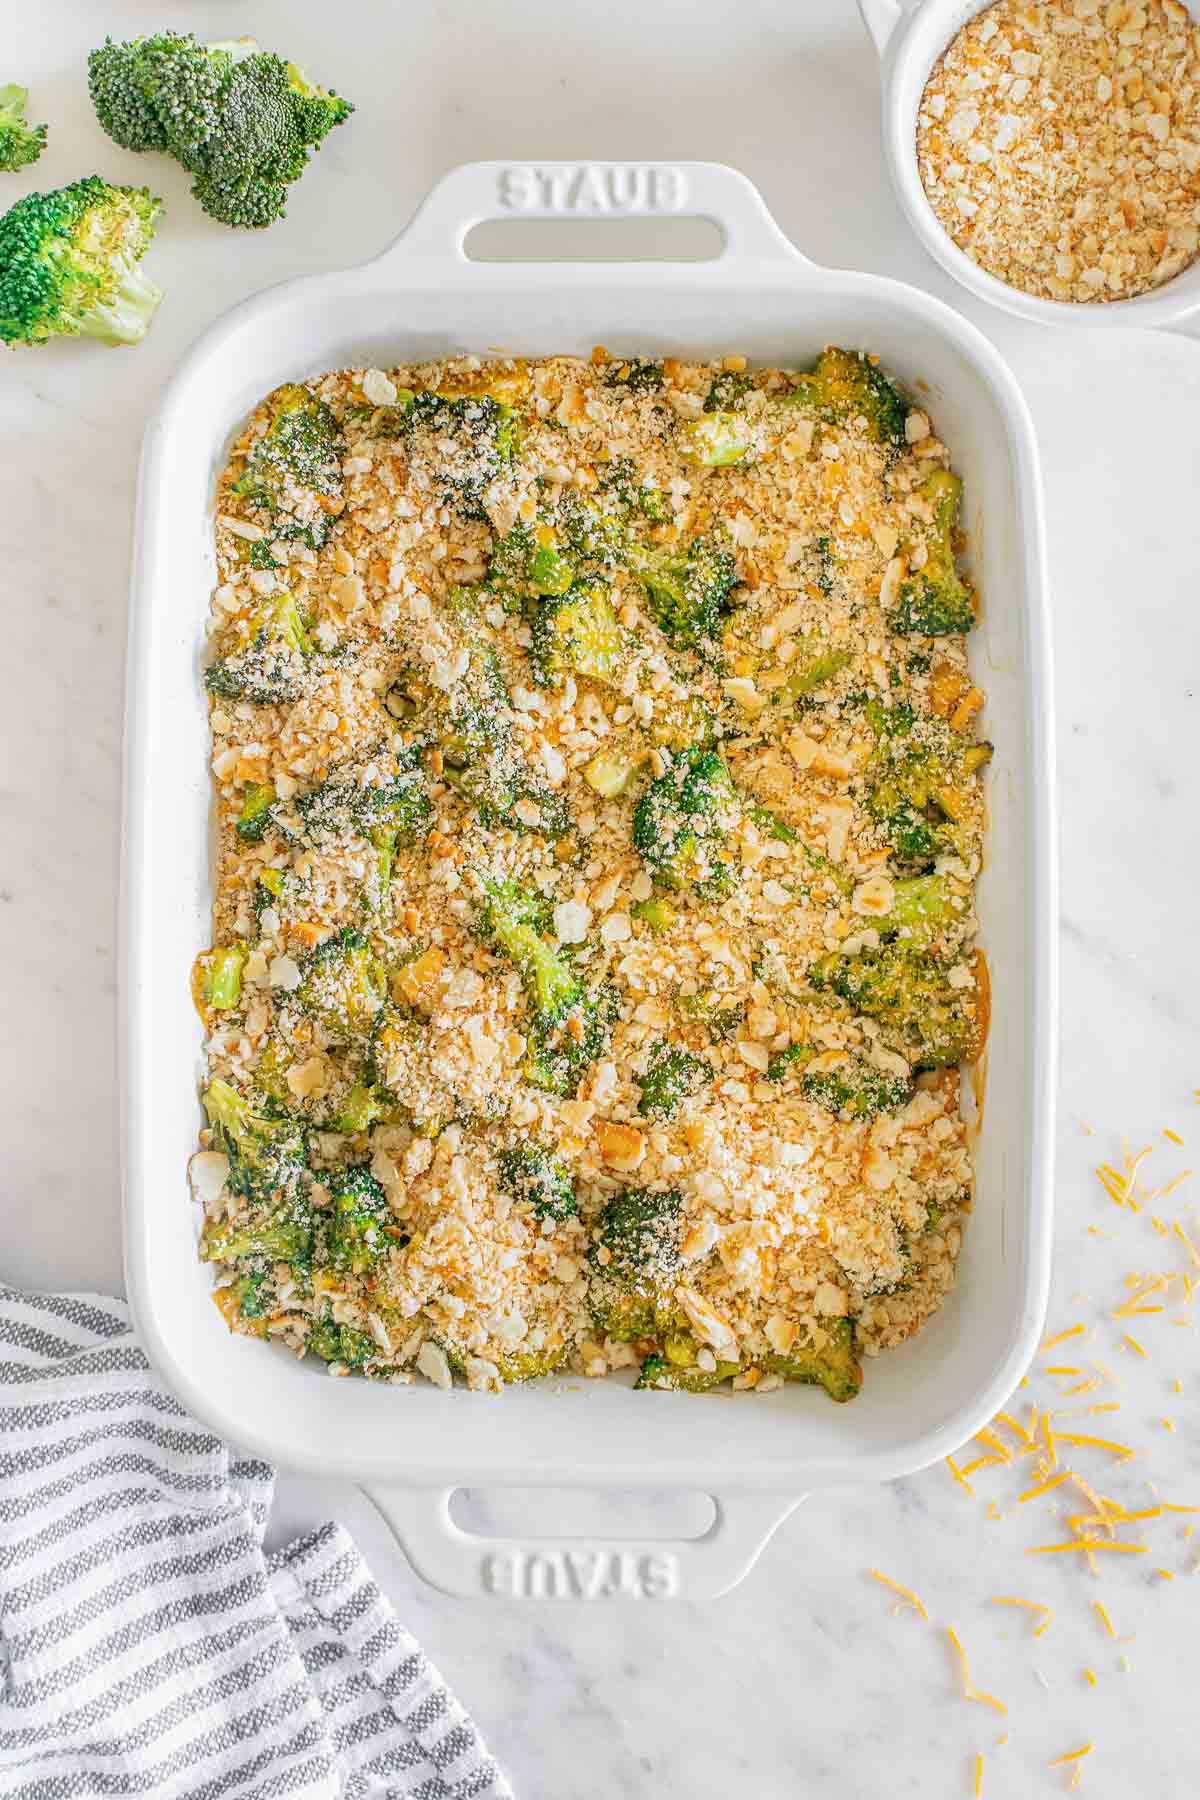 A casserole dish with broccoli casserole with a buttery cracker topped baked in it.